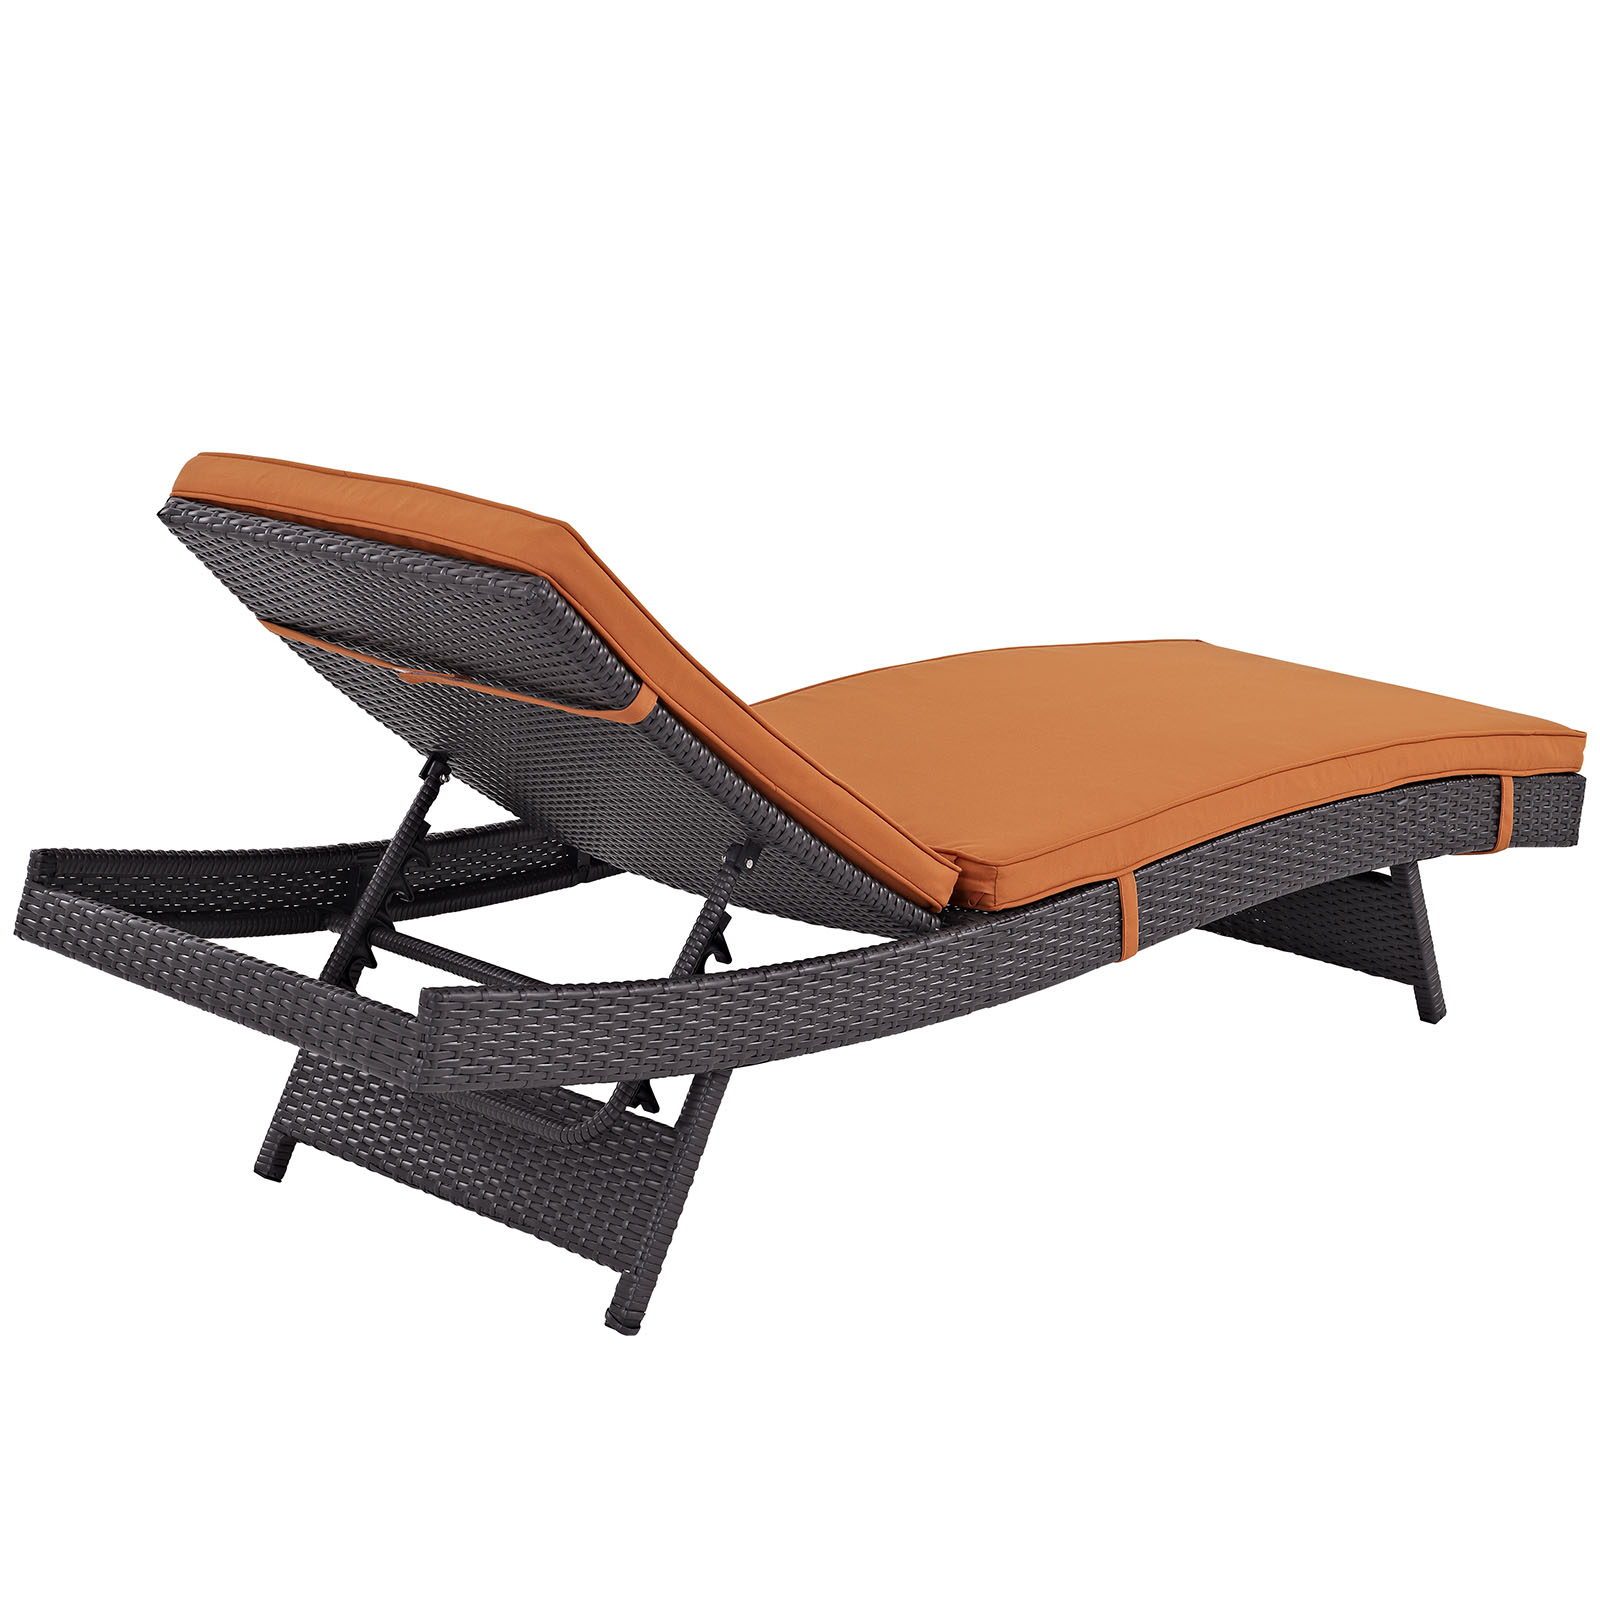 Modern Contemporary Urban Design Outdoor Patio Balcony Chaise Lounge Chair ( Set of 2), Orange, Rattan - image 4 of 4